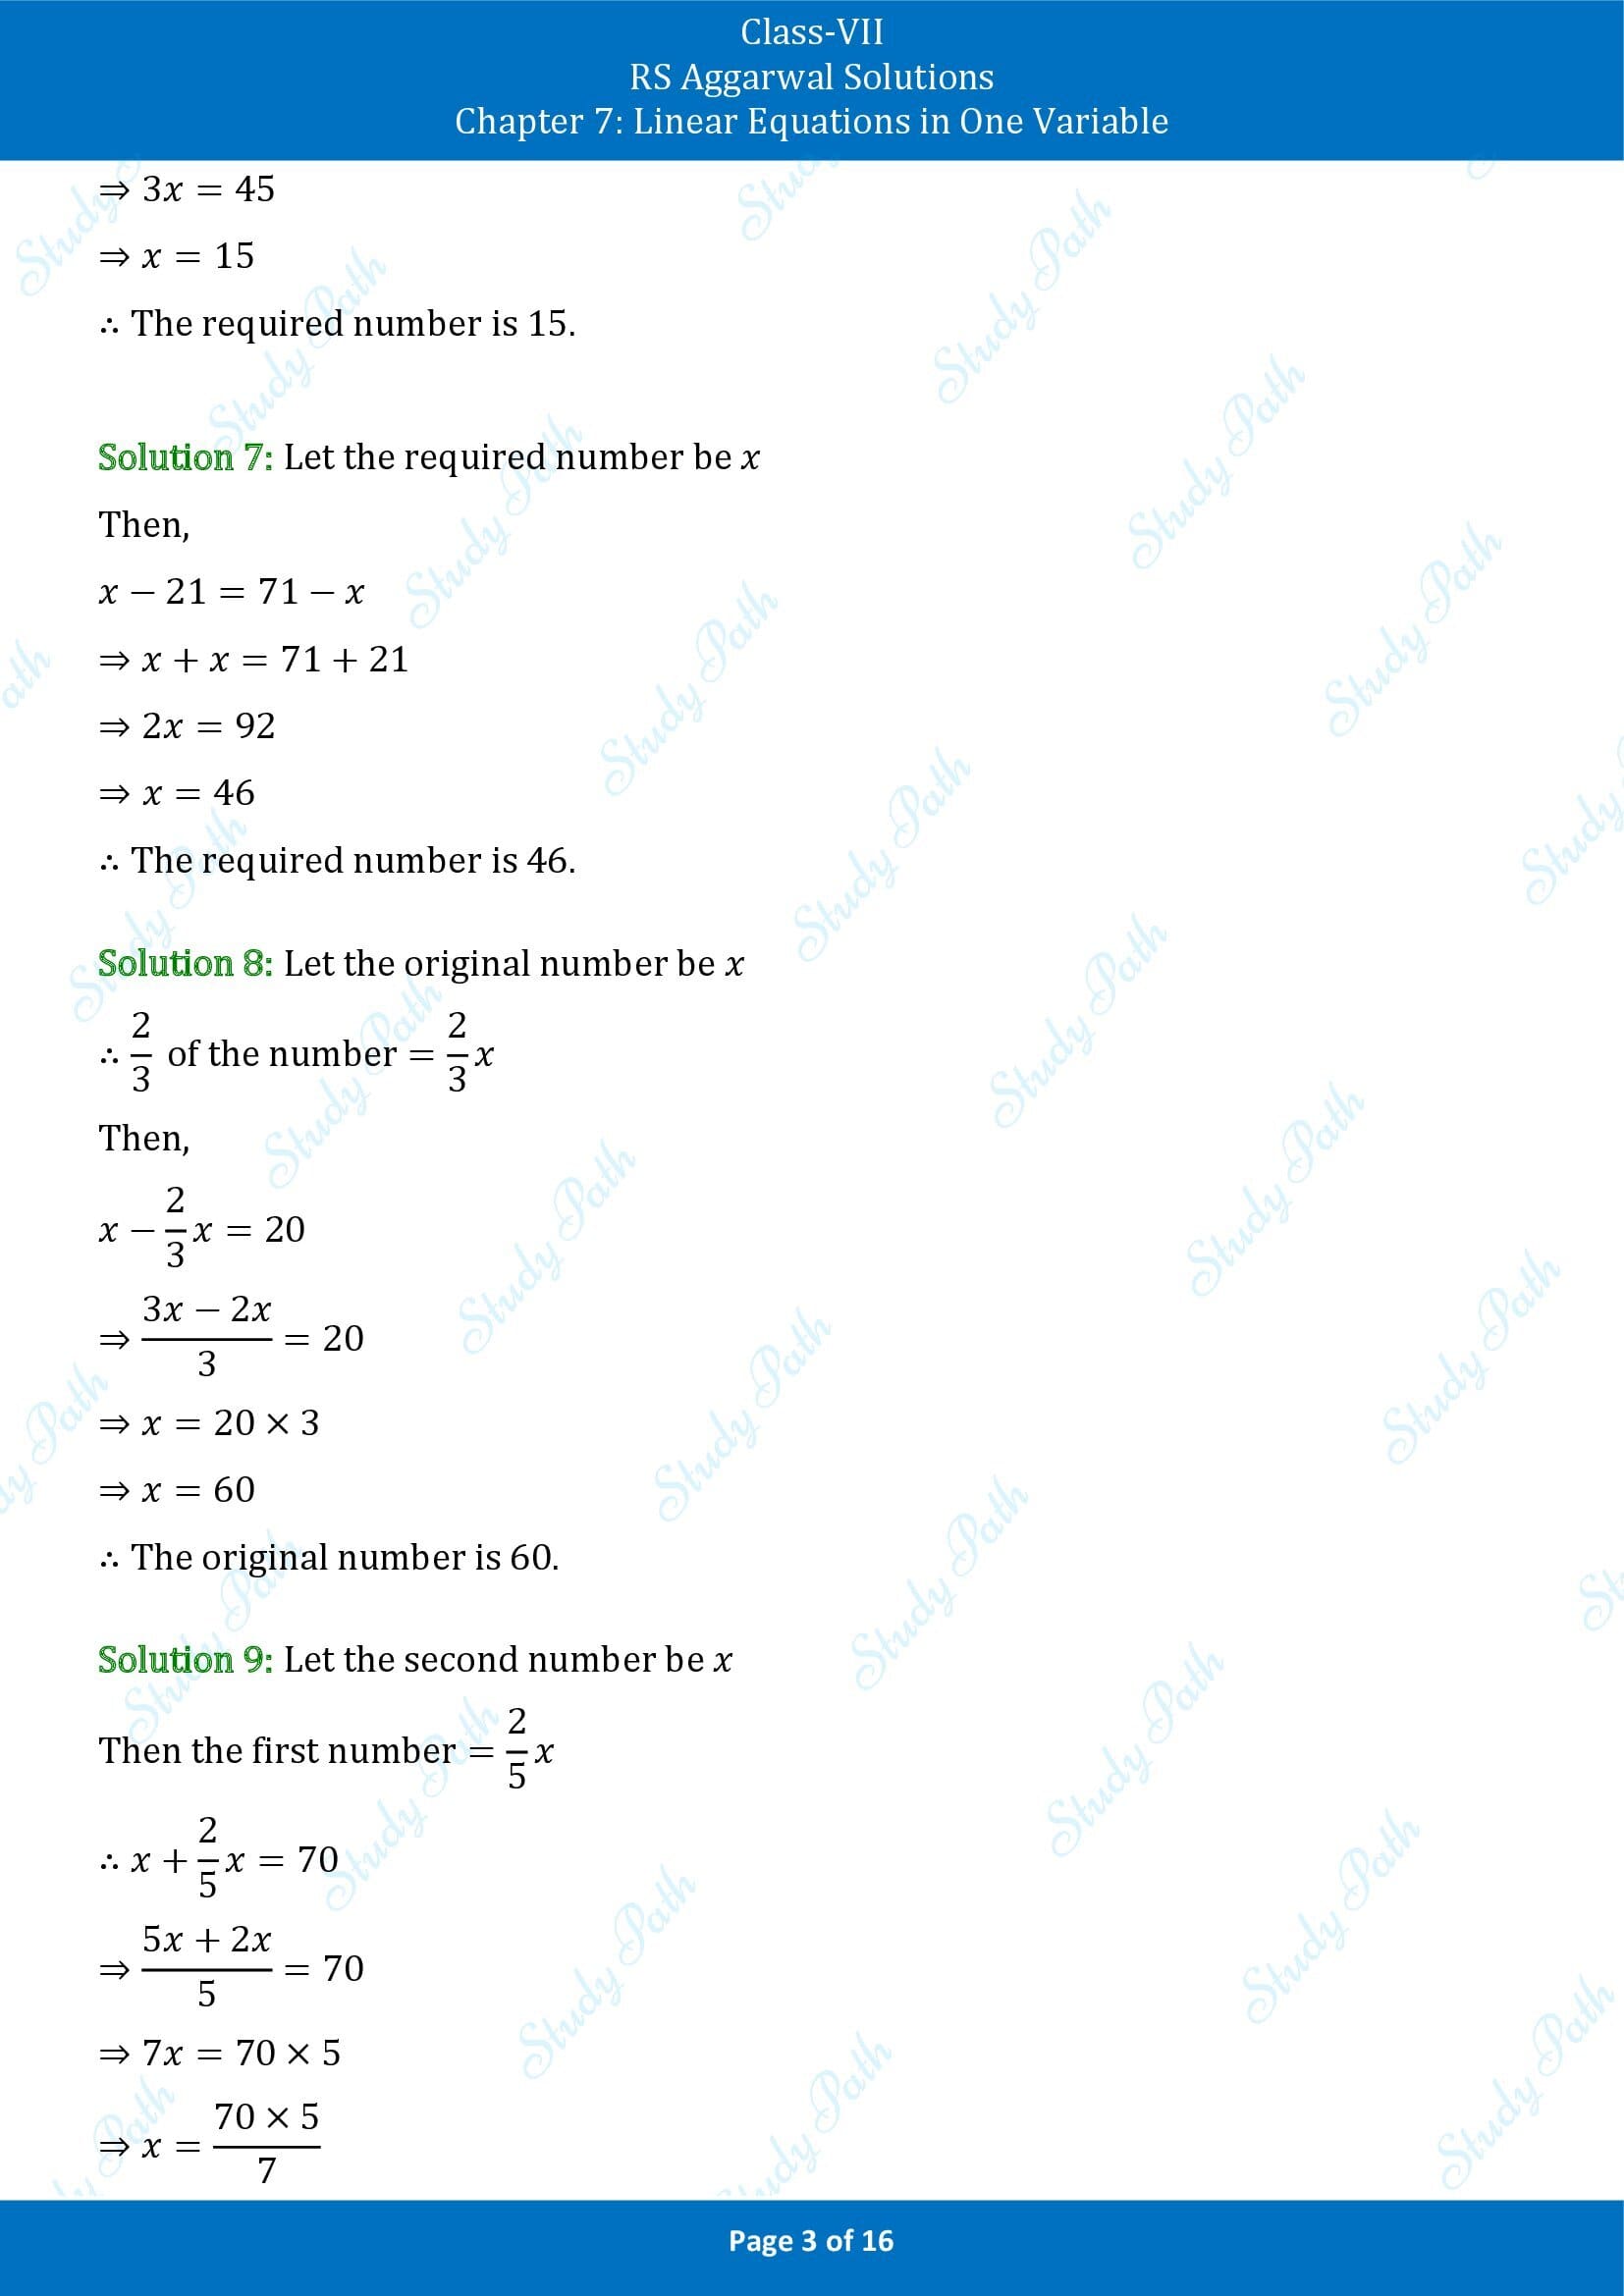 RS Aggarwal Solutions Class 7 Chapter 7 Linear Equations in One Variable Exercise 7B 00003